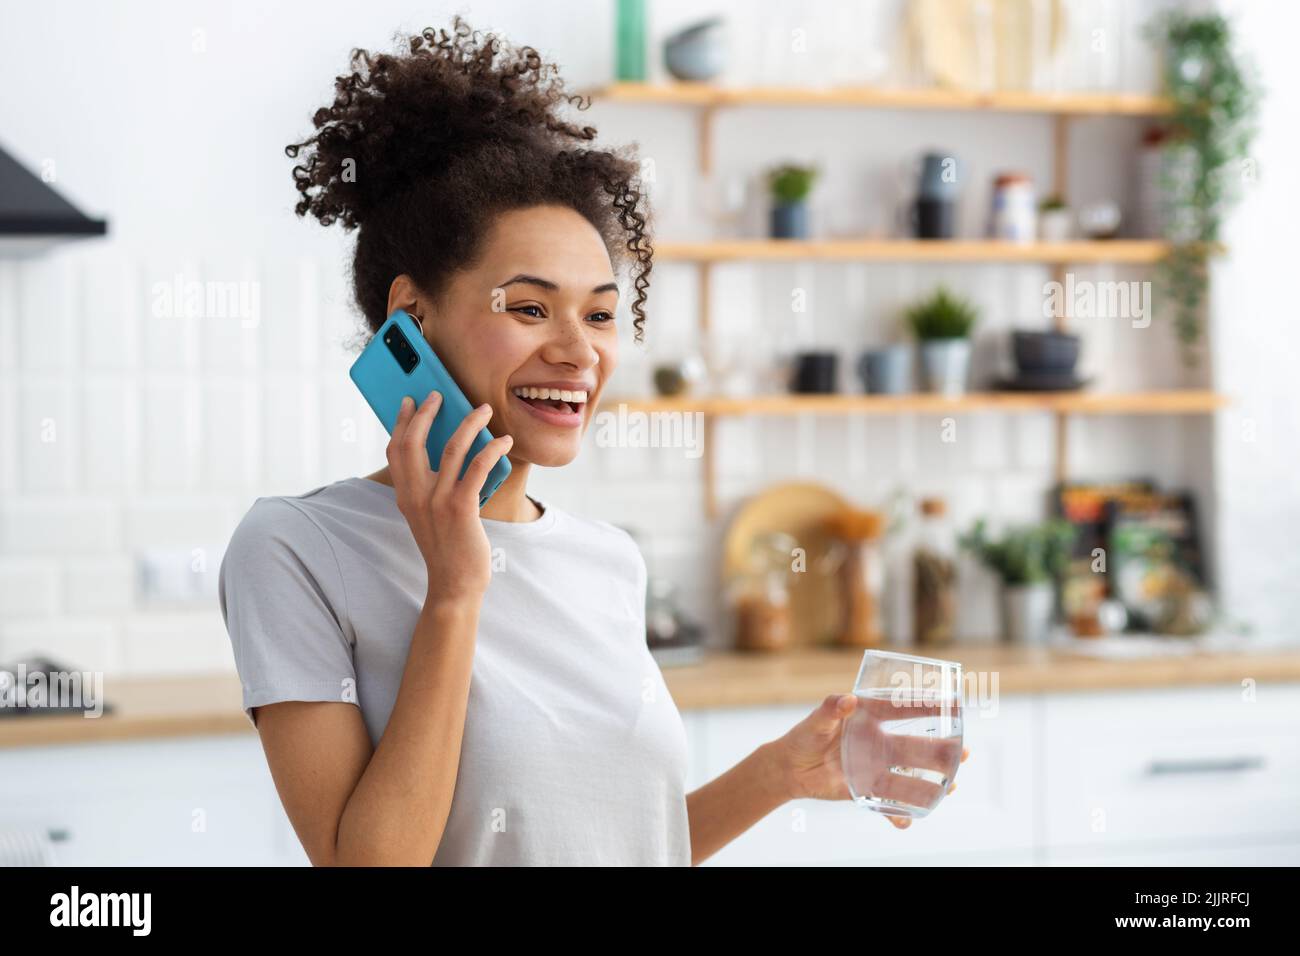 Smiling African American woman holding glass of clean water talking on mobile phone healthy lifestyle concept Stock Photo